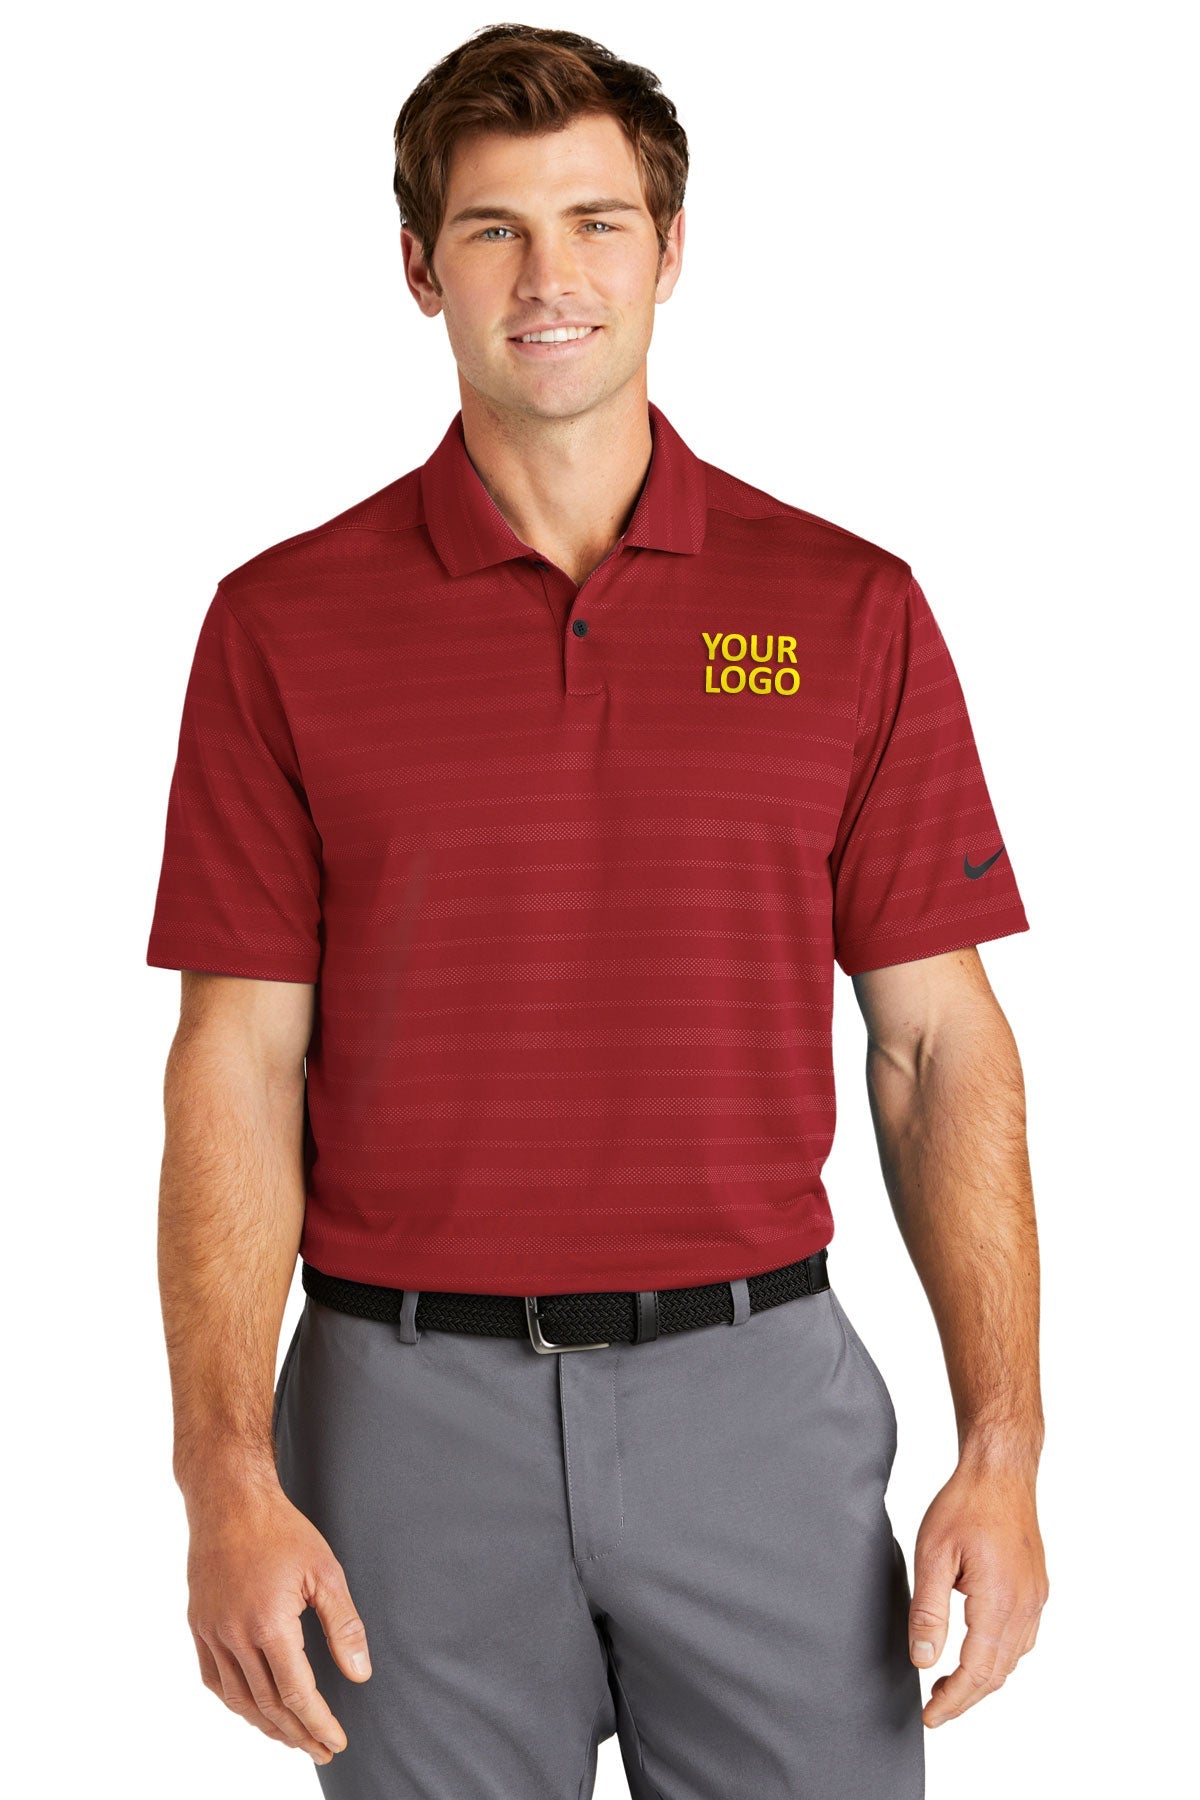 Nike Team Red NKDC2115 polo shirts with logos